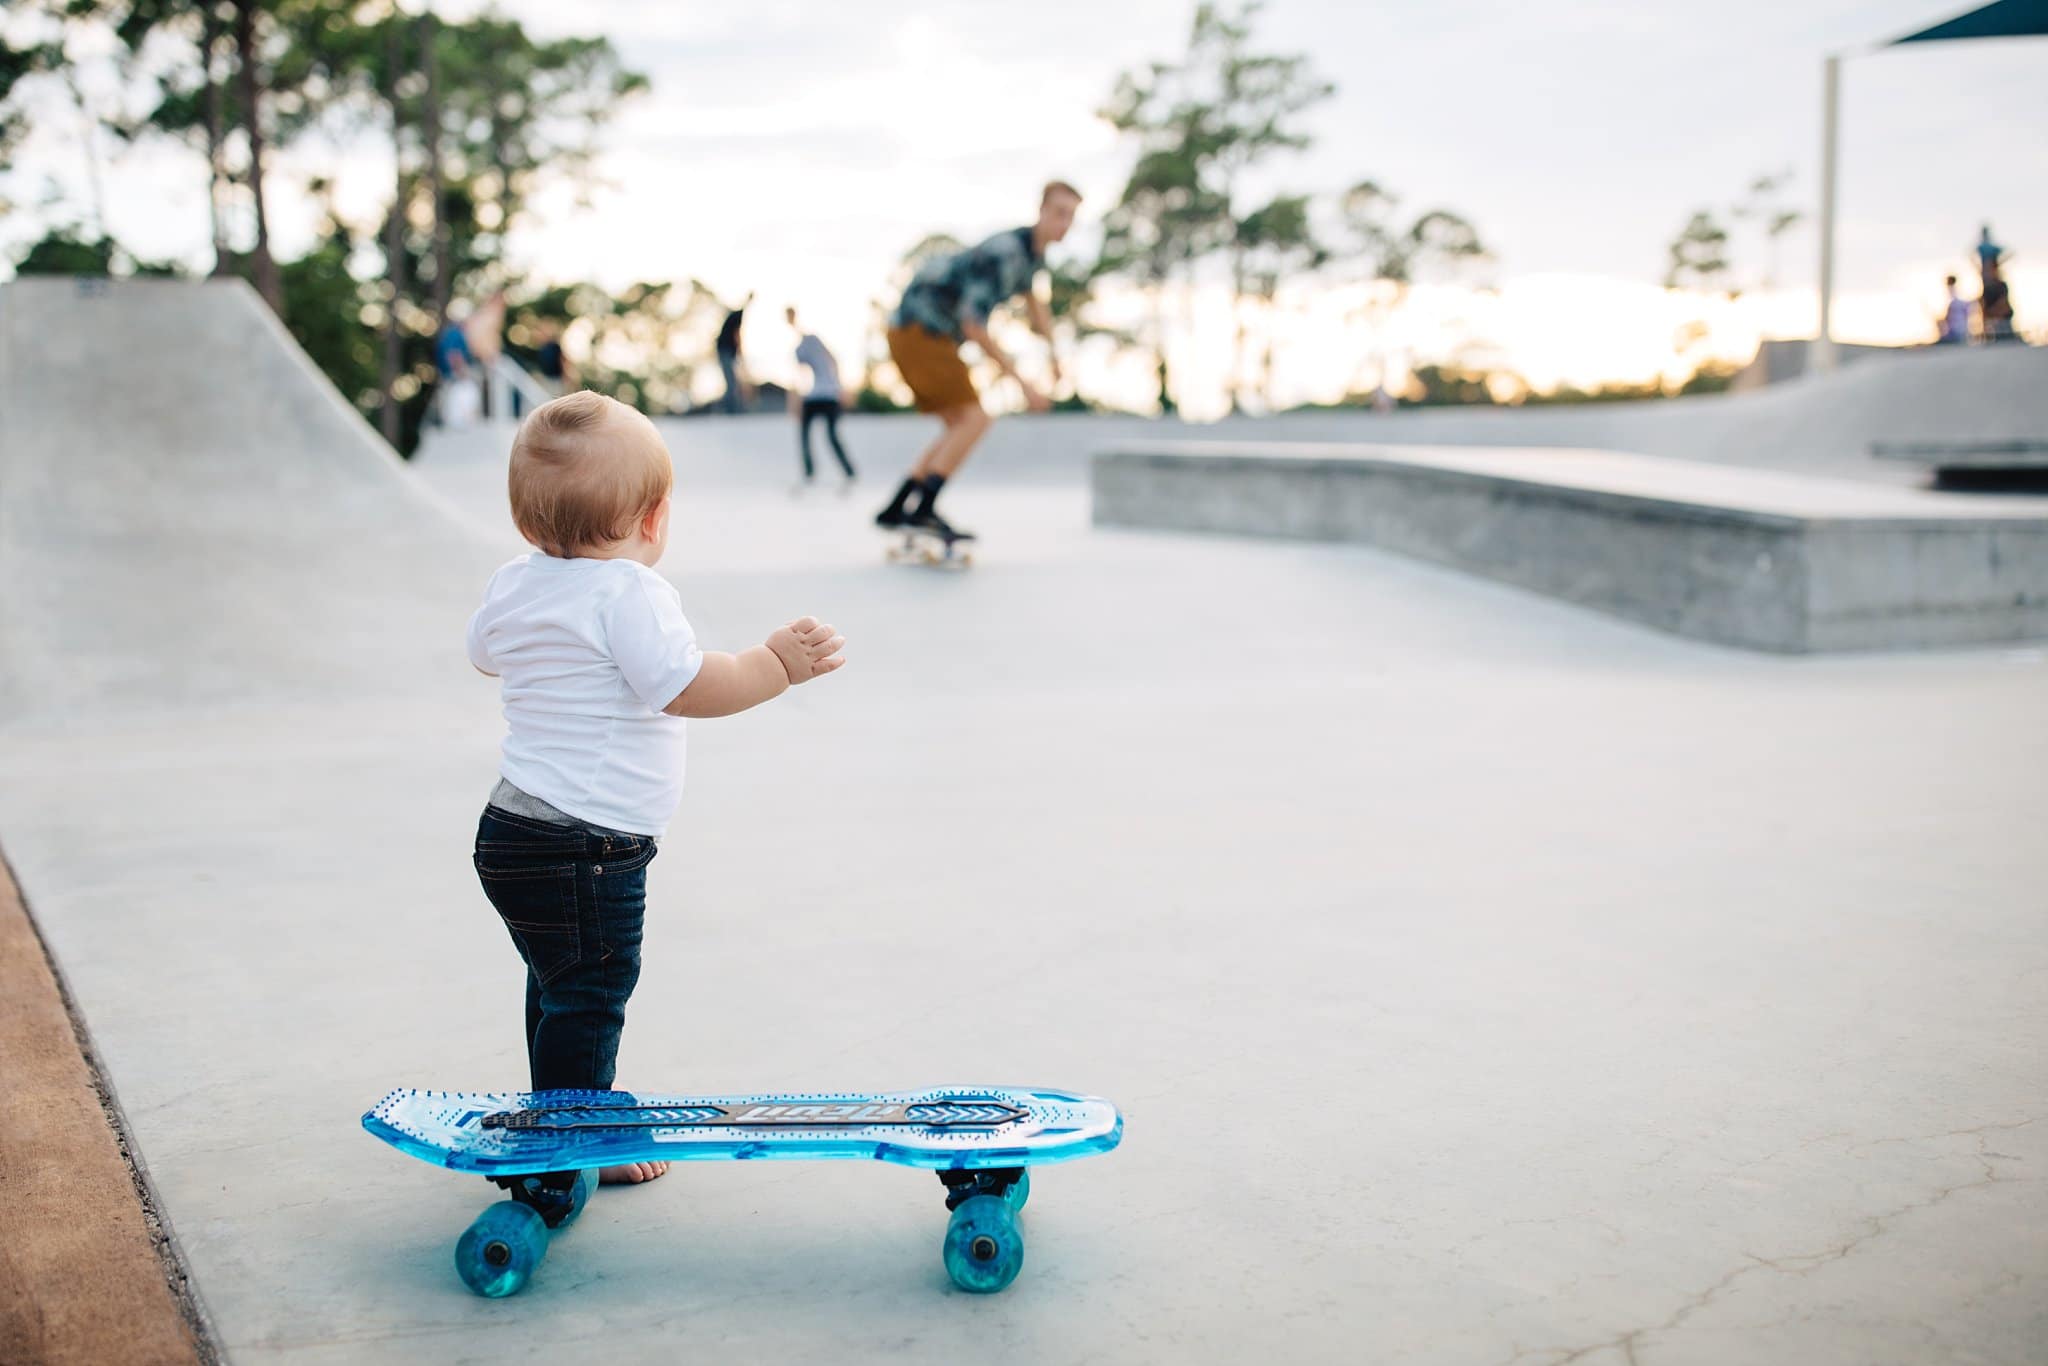 One Year Photos in Jacksonville toddler baby with skateboard ray bans at skate park sunshine park